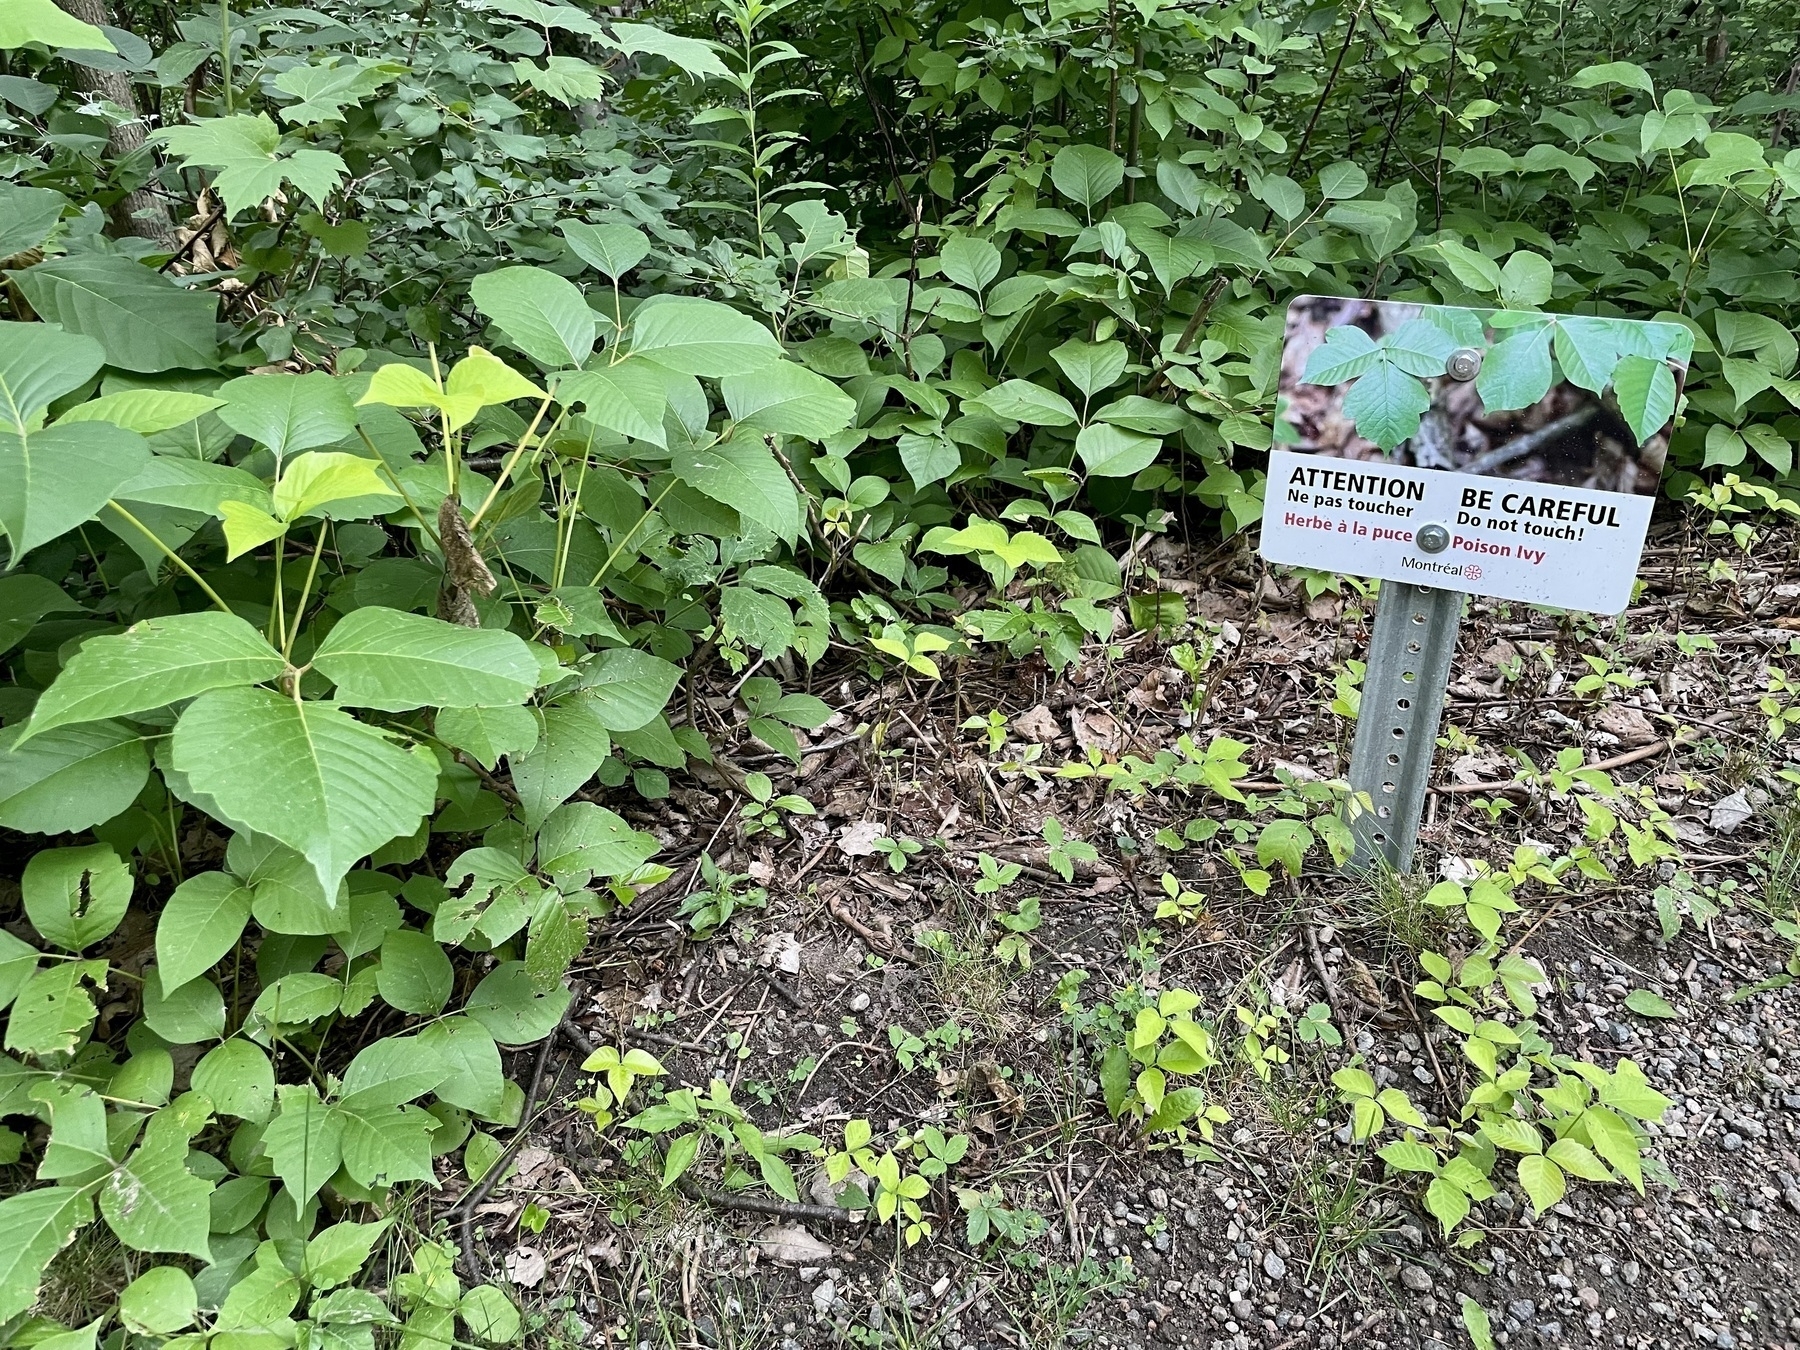 A photo of poison ivy along the side of a walking trail, with a small sign warning park visitors of its presence.